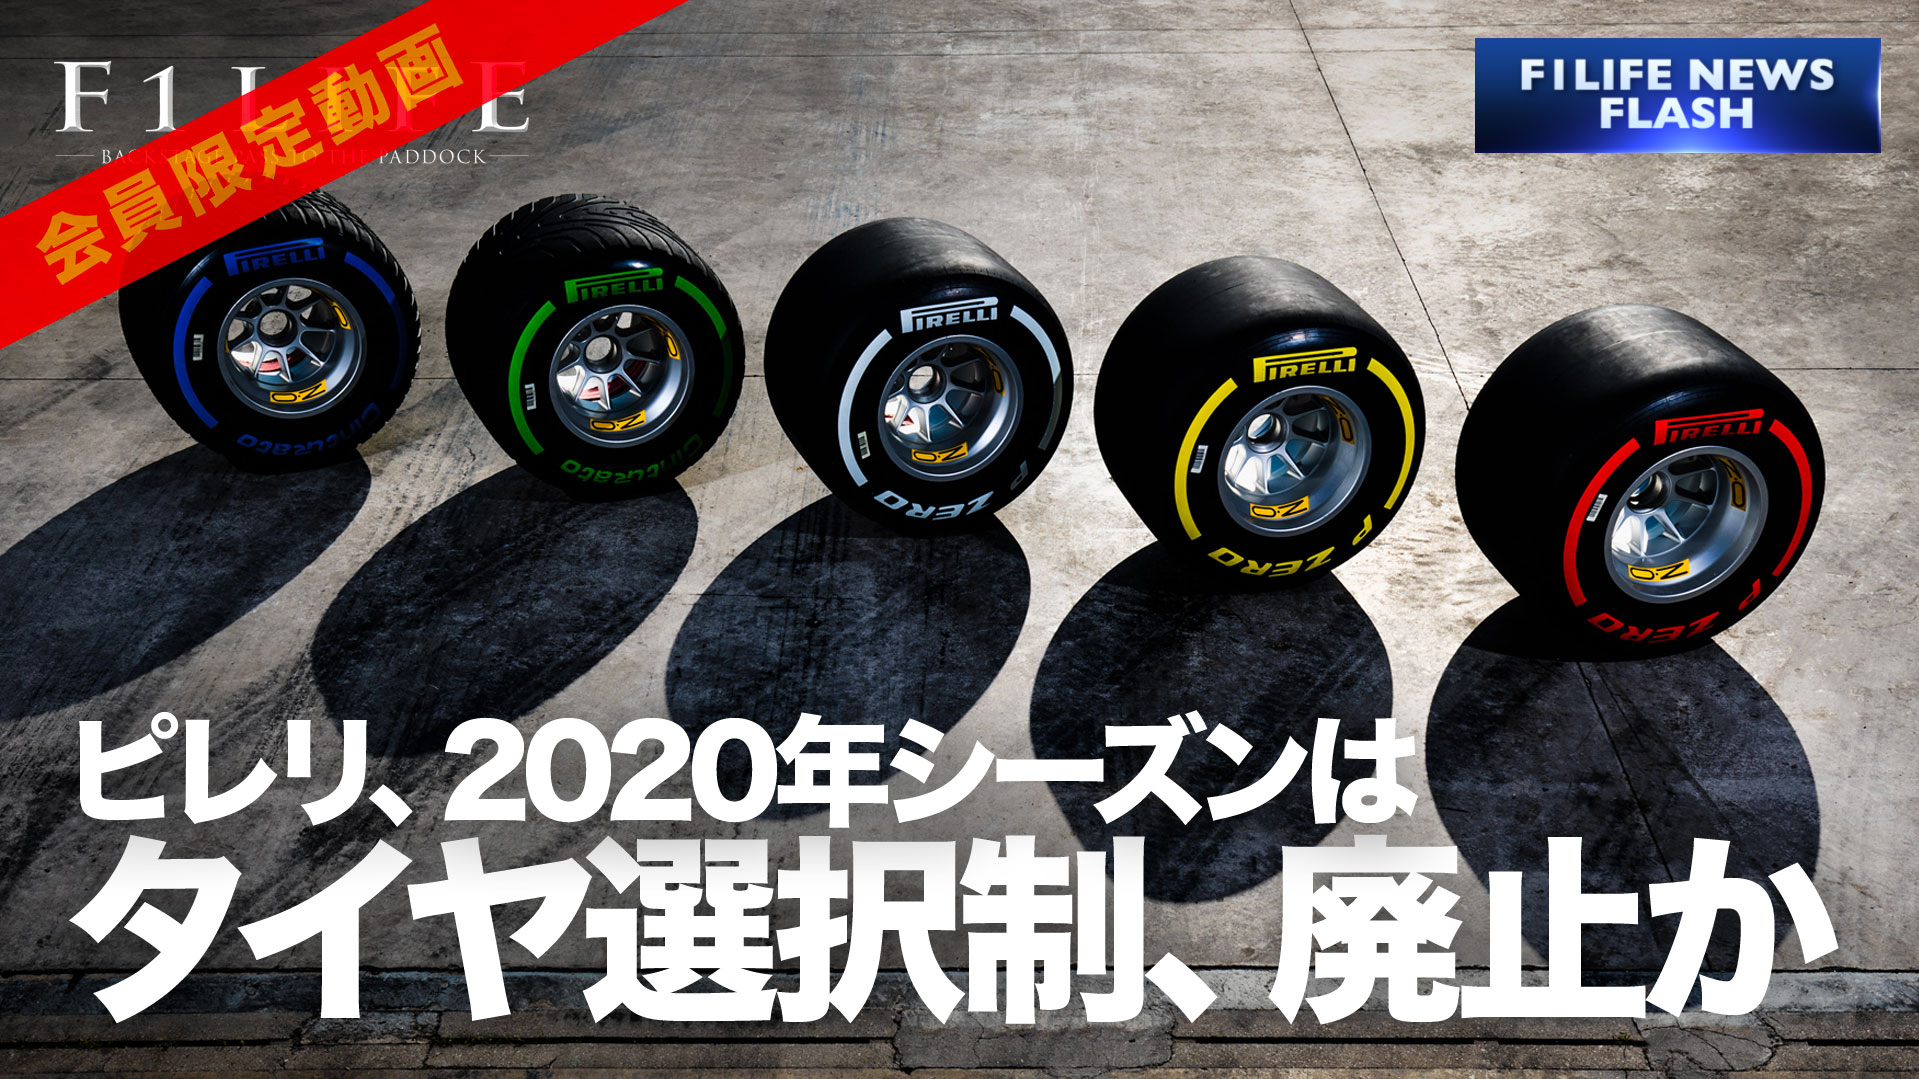 【F1LIFE channel】ピレリ、2020年はタイヤ選択制を廃止か【セット数】